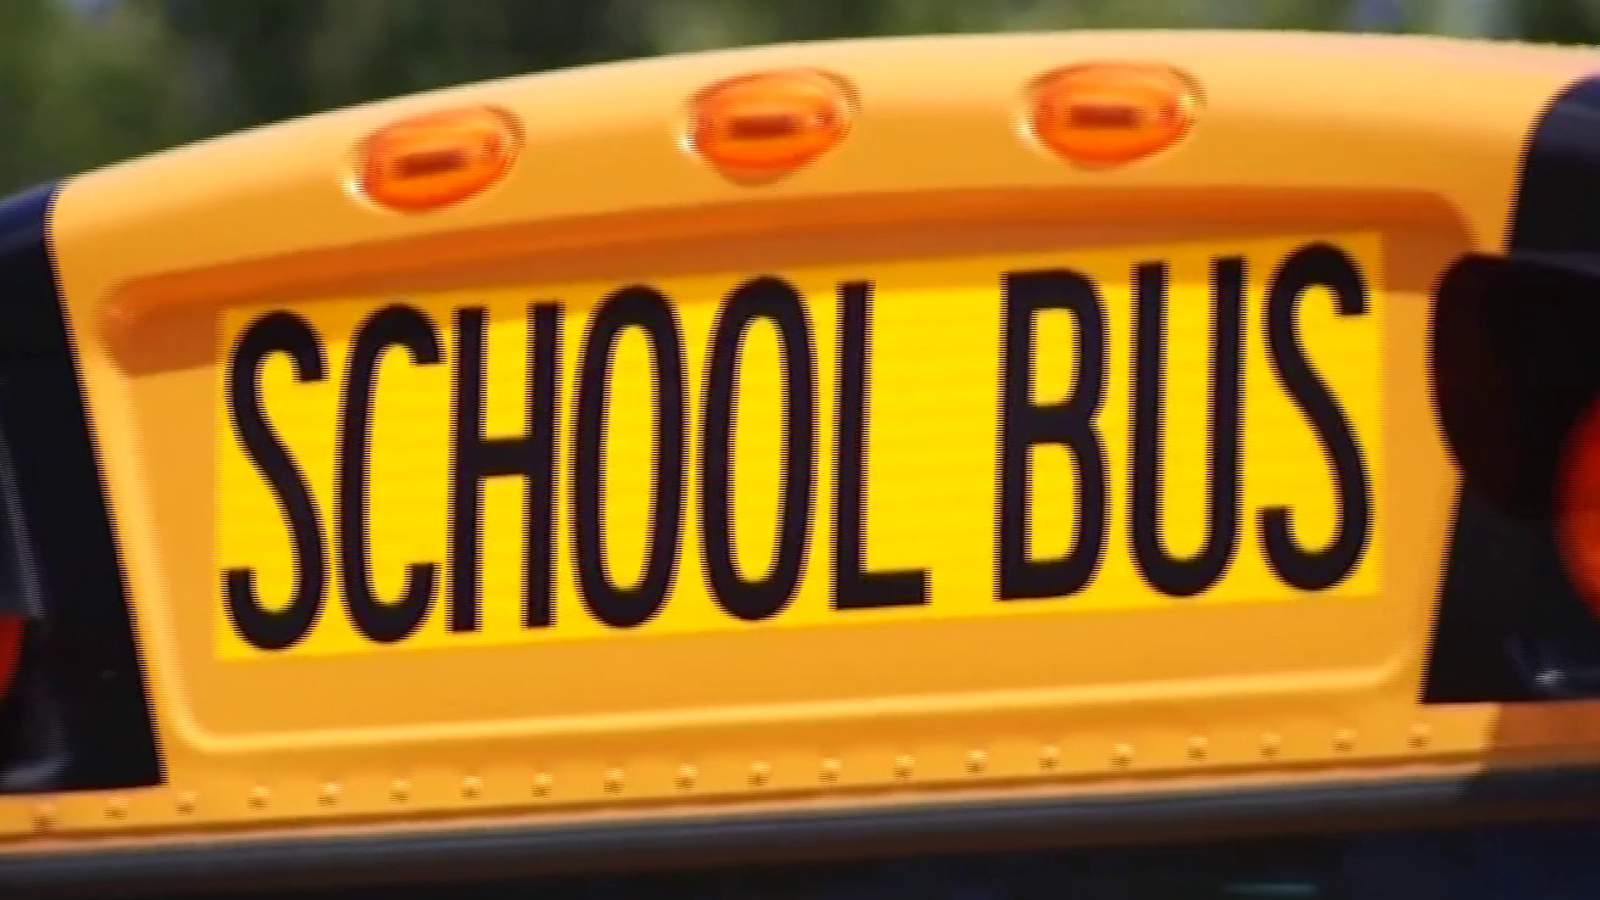 Student at Lord Botetourt High School tests positive for COVID-19